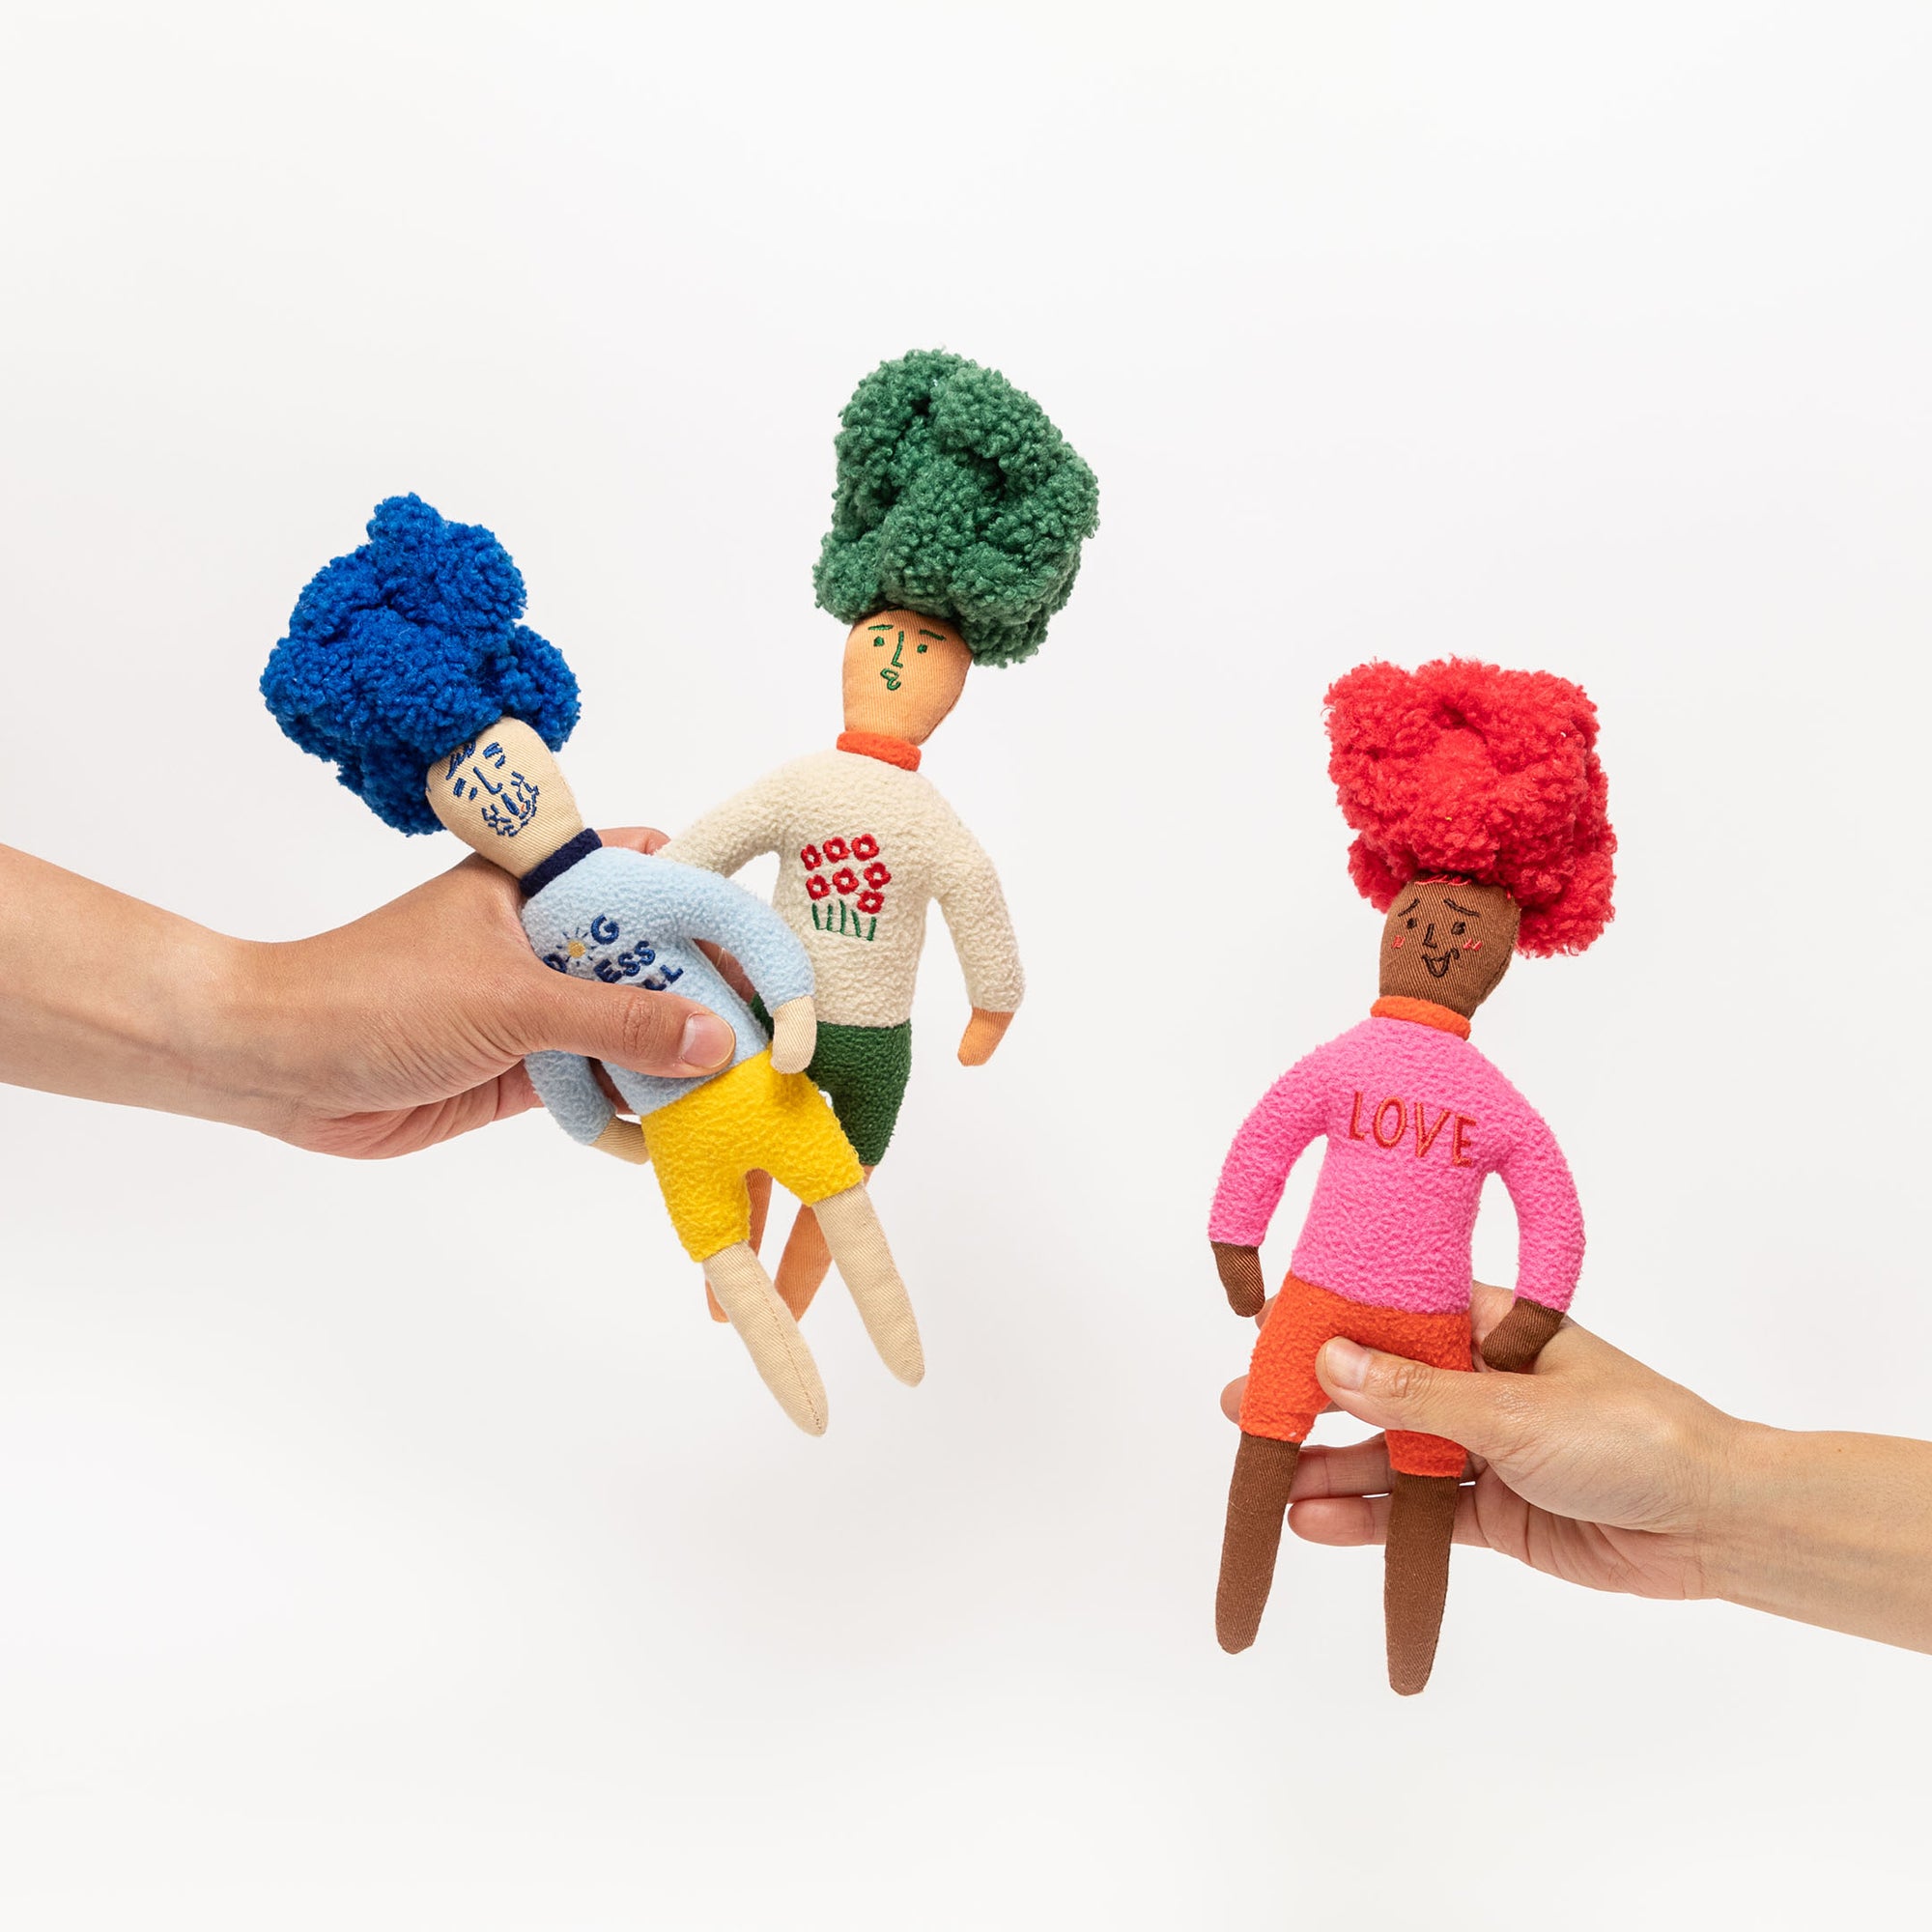  The image shows three nosework dog toys designed as colorful, handcrafted dolls with yarn hair in blue, green, and red. They are made with textured fabrics and have features that might hide treats to stimulate a dog's sense of smell. Each toy has a distinct look, with one wearing a cloud-patterned shirt, another with polka dots, and the third with "LOVE" on its shirt. They serve both as engaging sensory toys for pets and as playful decor items.